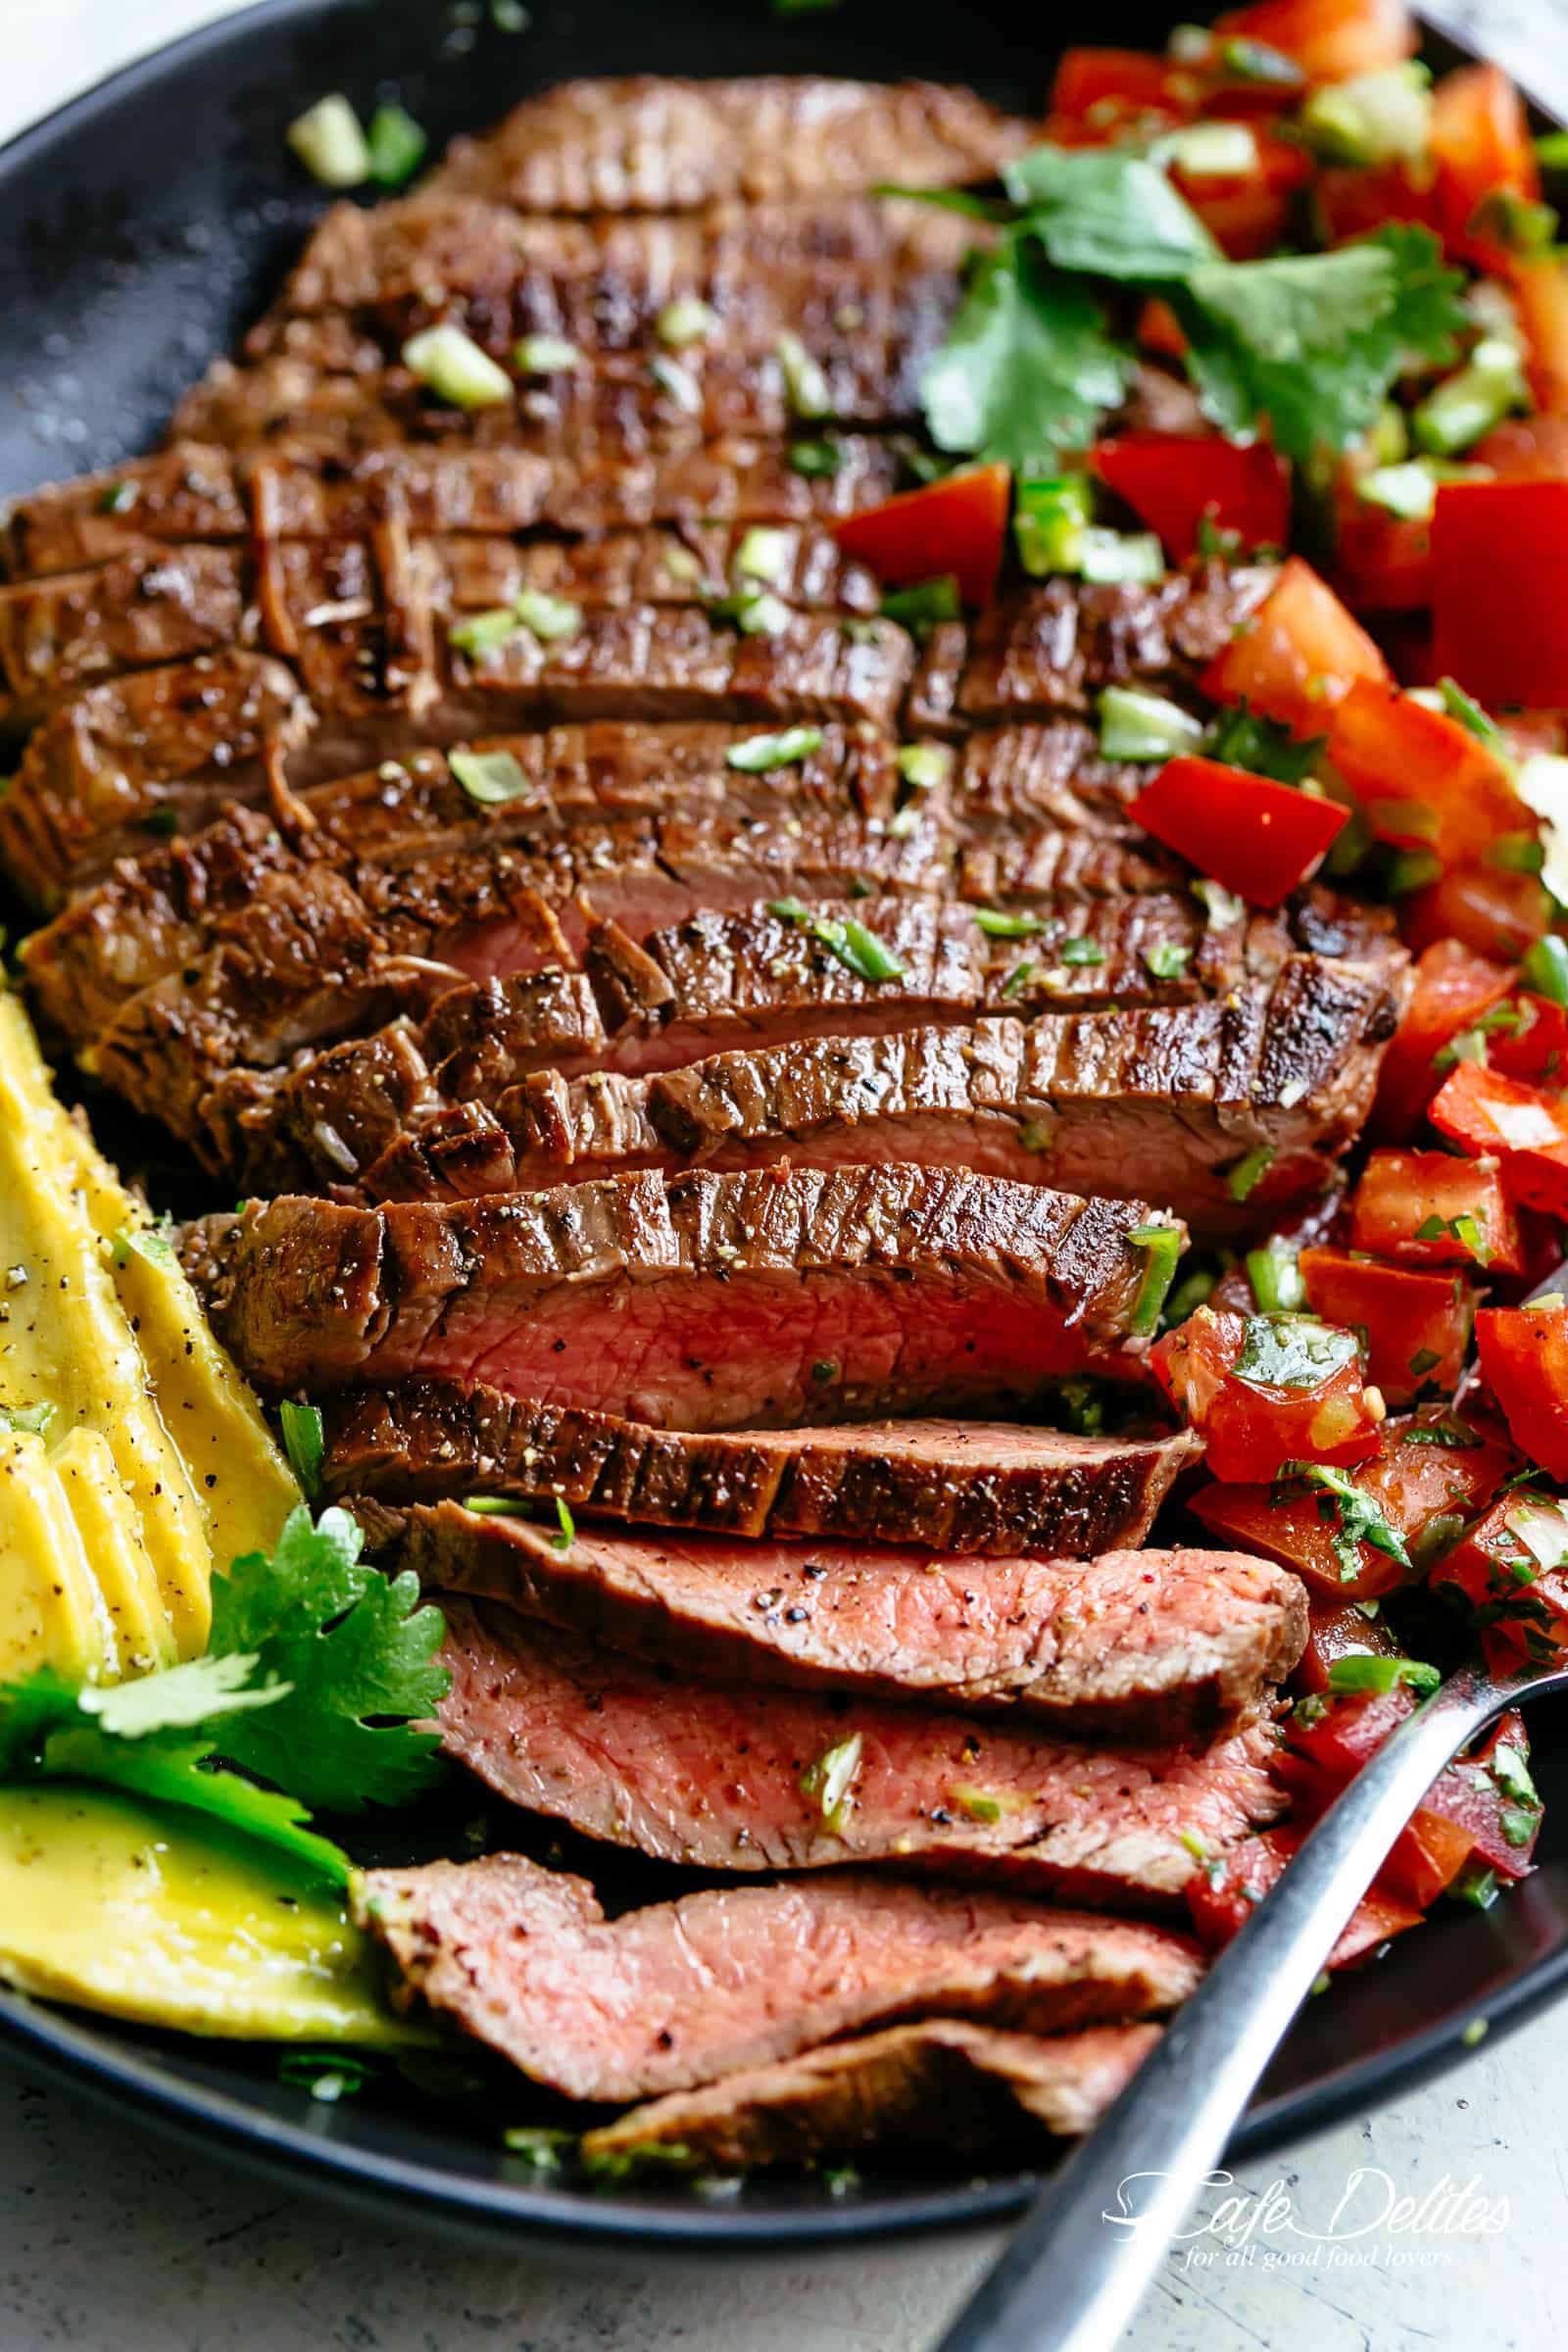 Carne Asada prepared with a deliciously easy and authentic marinade just in time for your Cinco De Mayo menu planning! Juicy and tender grilled flank or skirt steak full of incredible Mexican flavours makes this homemade Carne Asada recipe better than any restaurant! | cafedelites.com